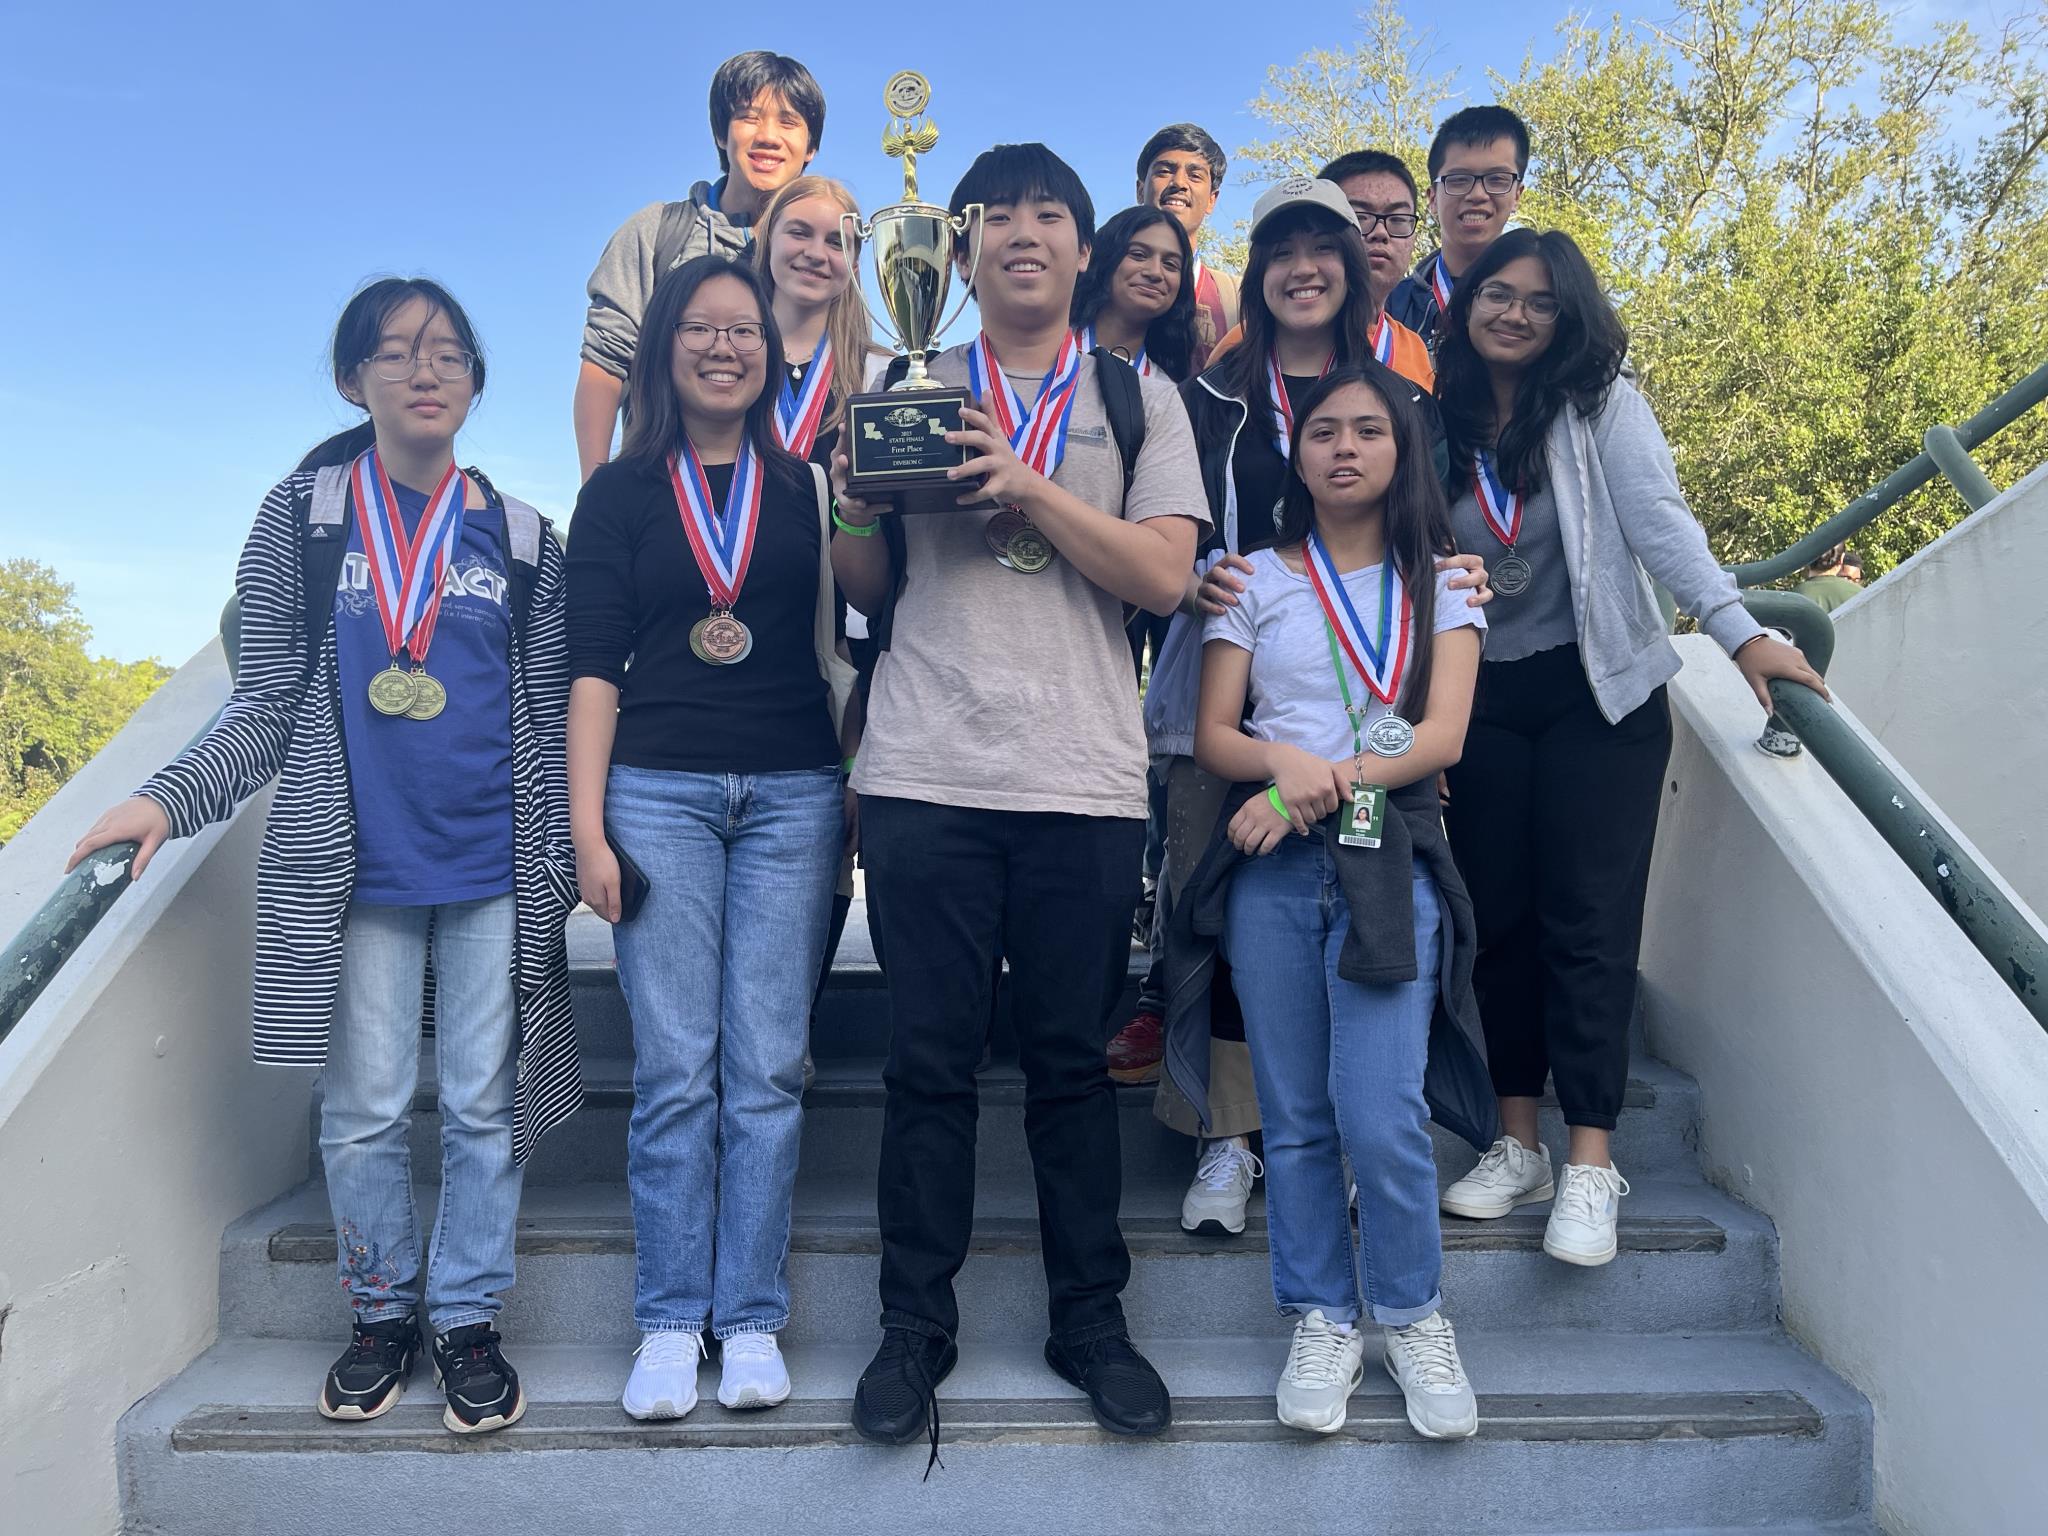 The BRMHS Science Olympiad team finished first overall in the Louisiana State Science Olympiad competition.